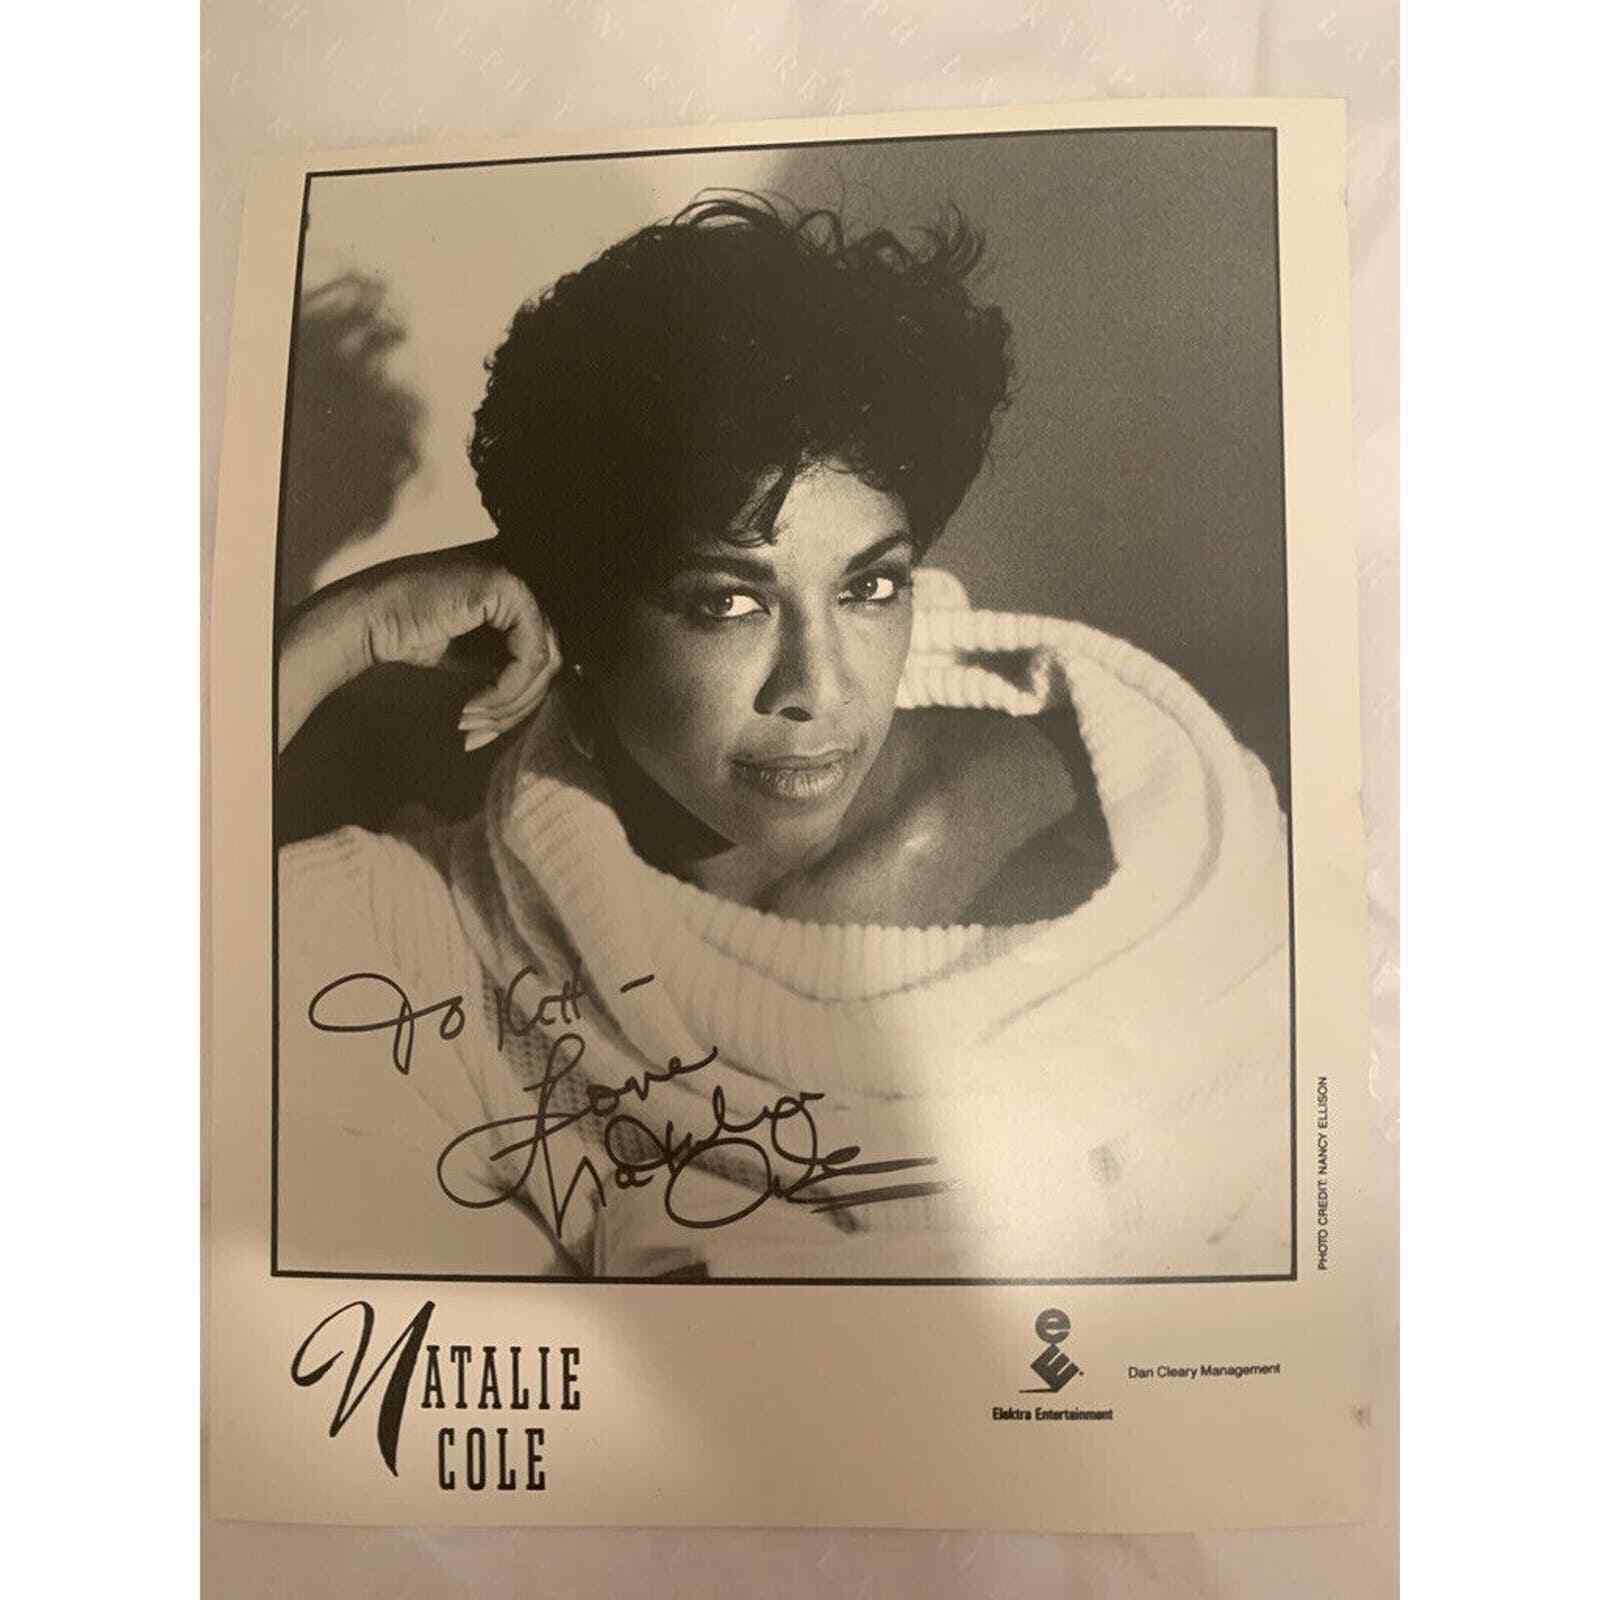 Natalie Cole Lobby Card INSCRIBED - SIGNED 8 x 10